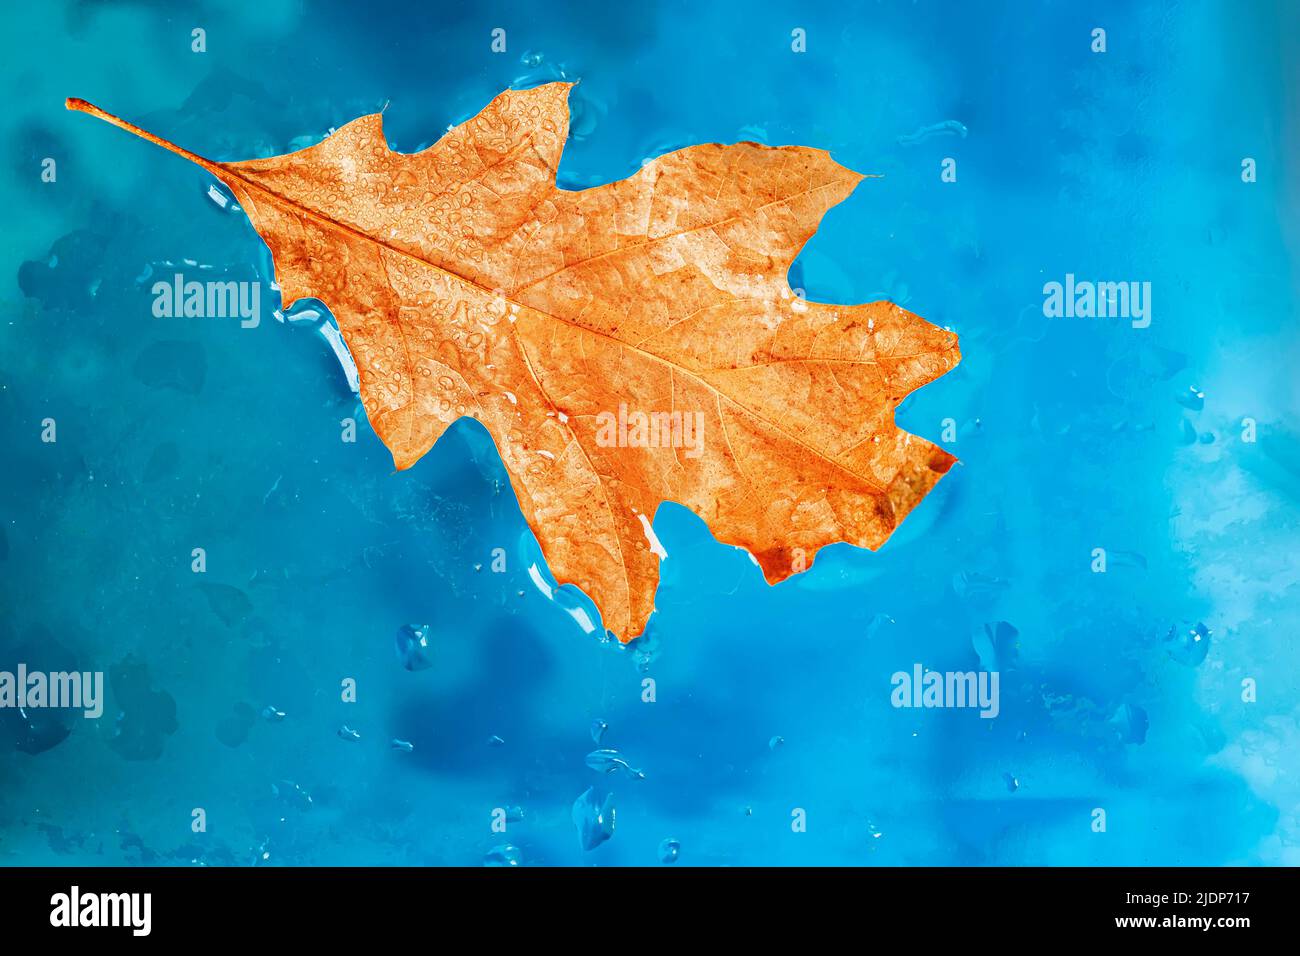 Bright oak leaf in blue water close-up, natural background. Autumn, fall concept Stock Photo